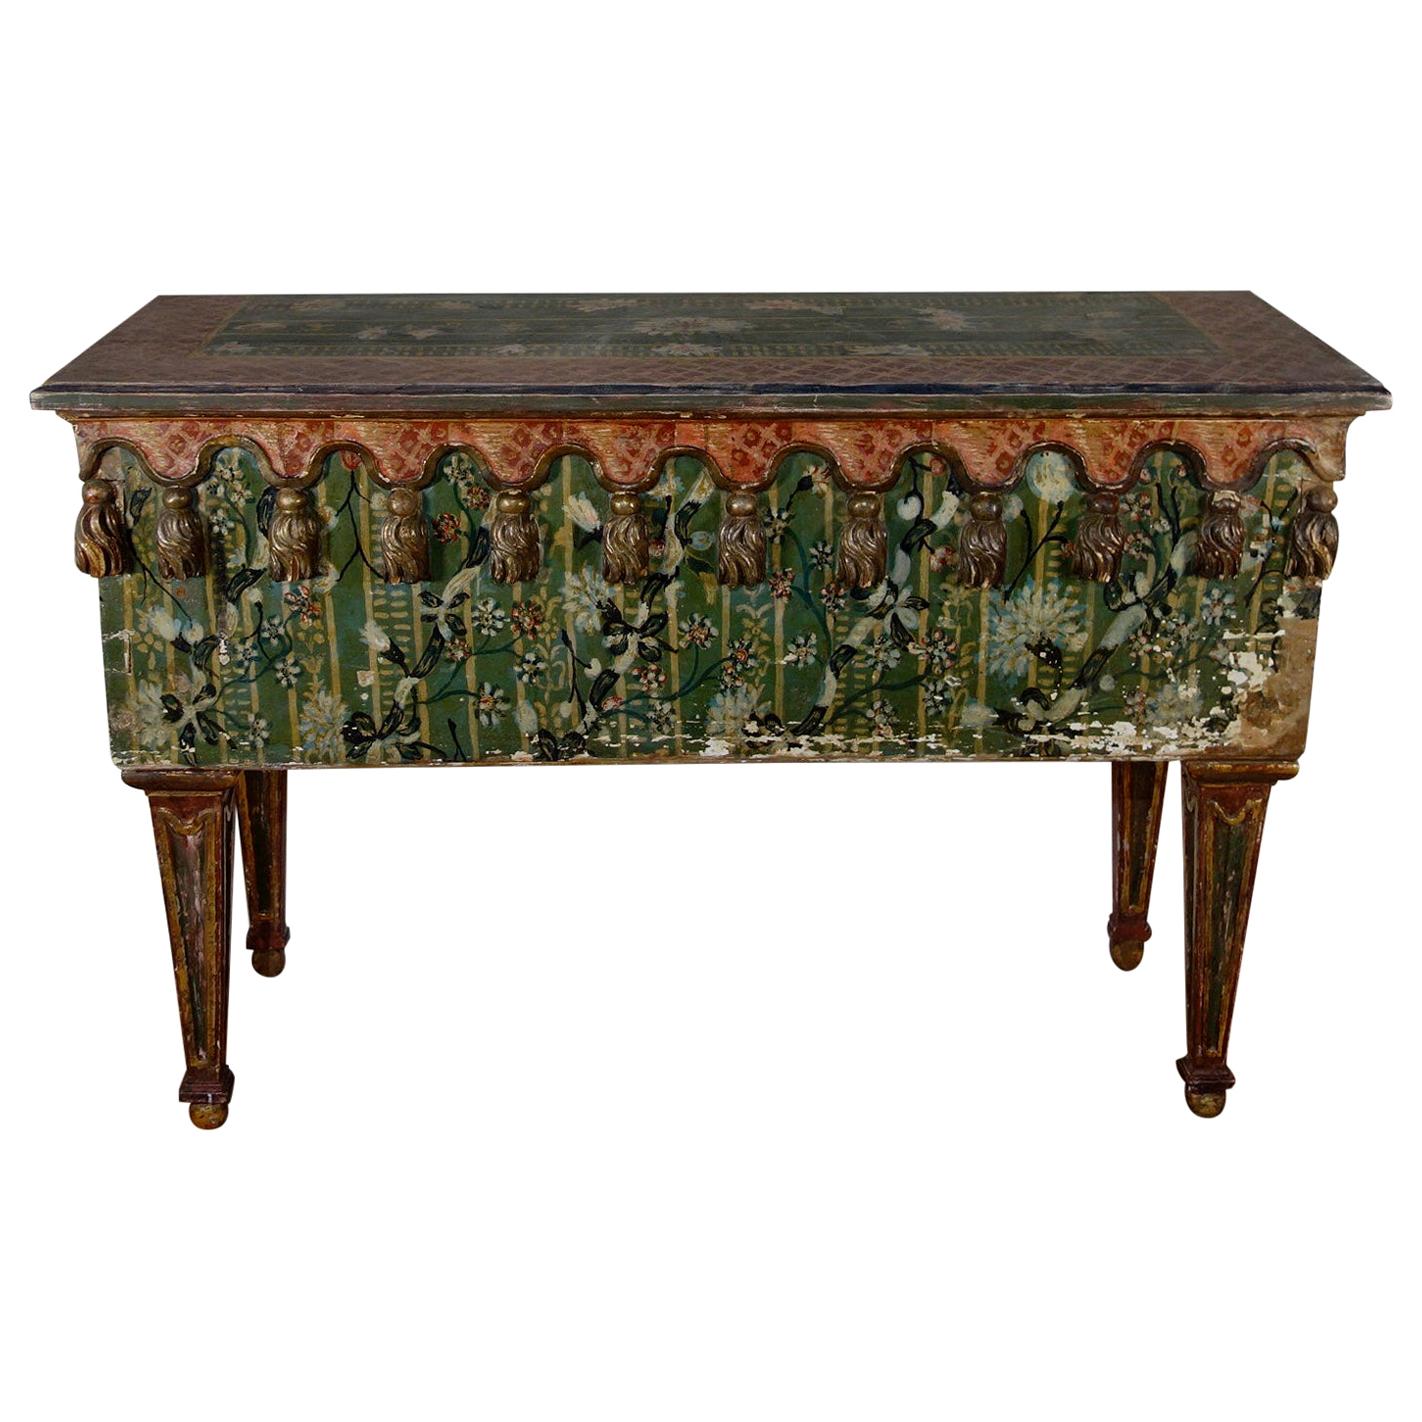 Exceptional 19th Century Italian Polychrome Original Painted Console Side Table